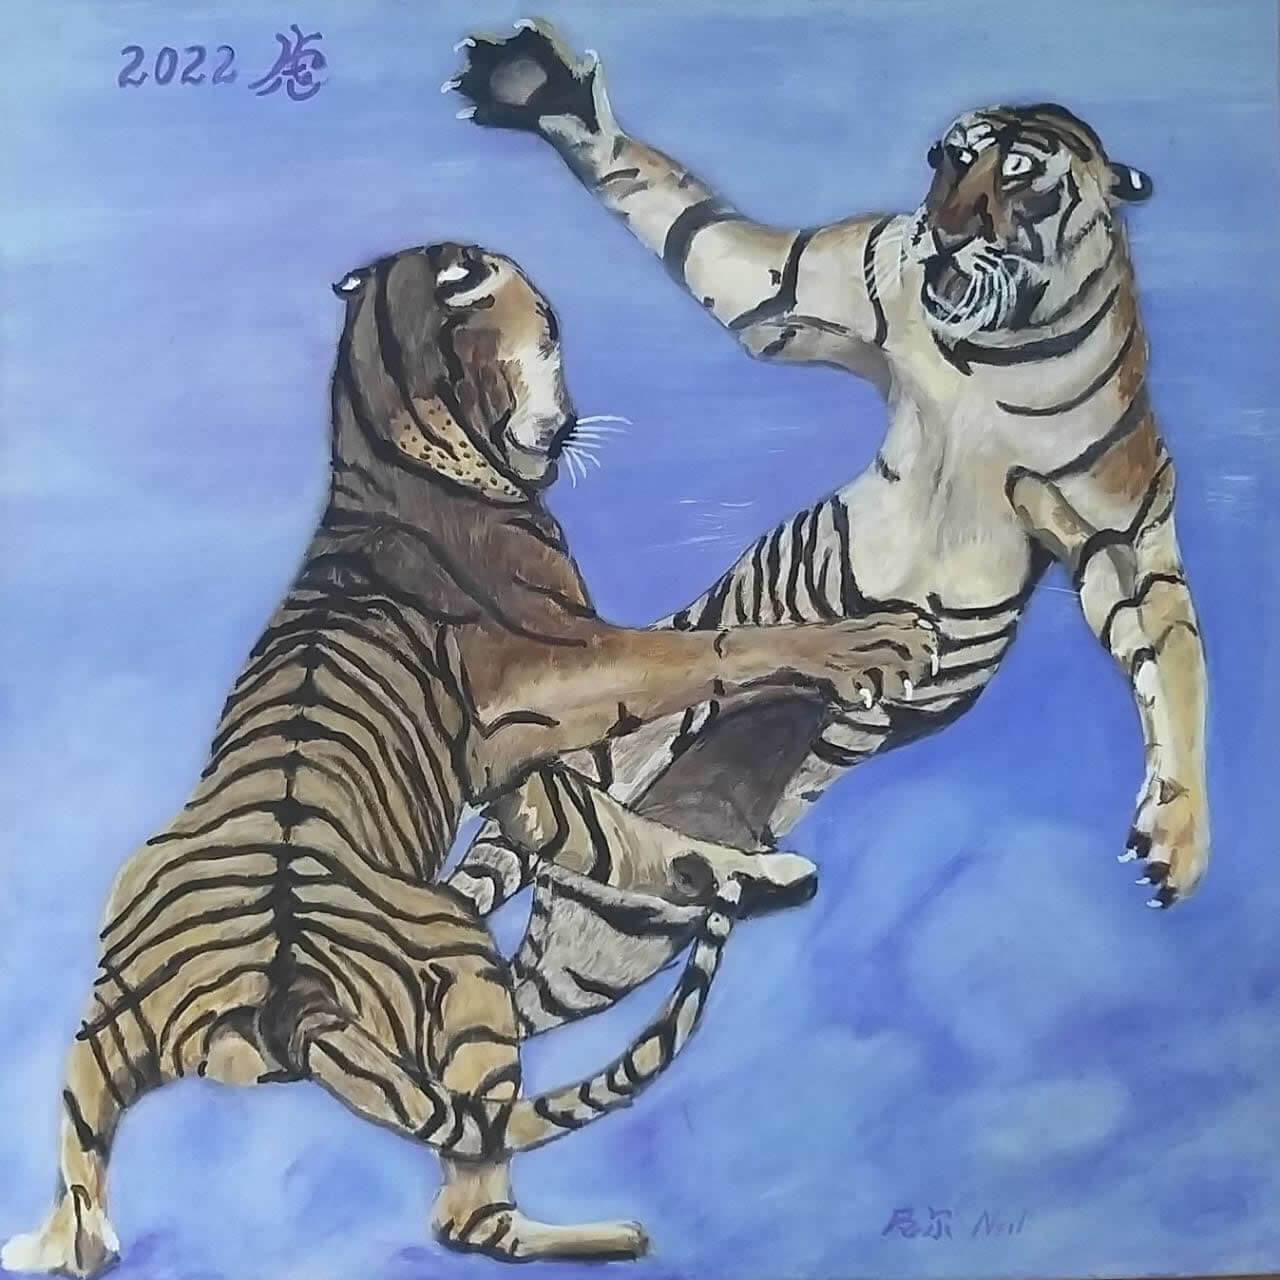 the tiger fight